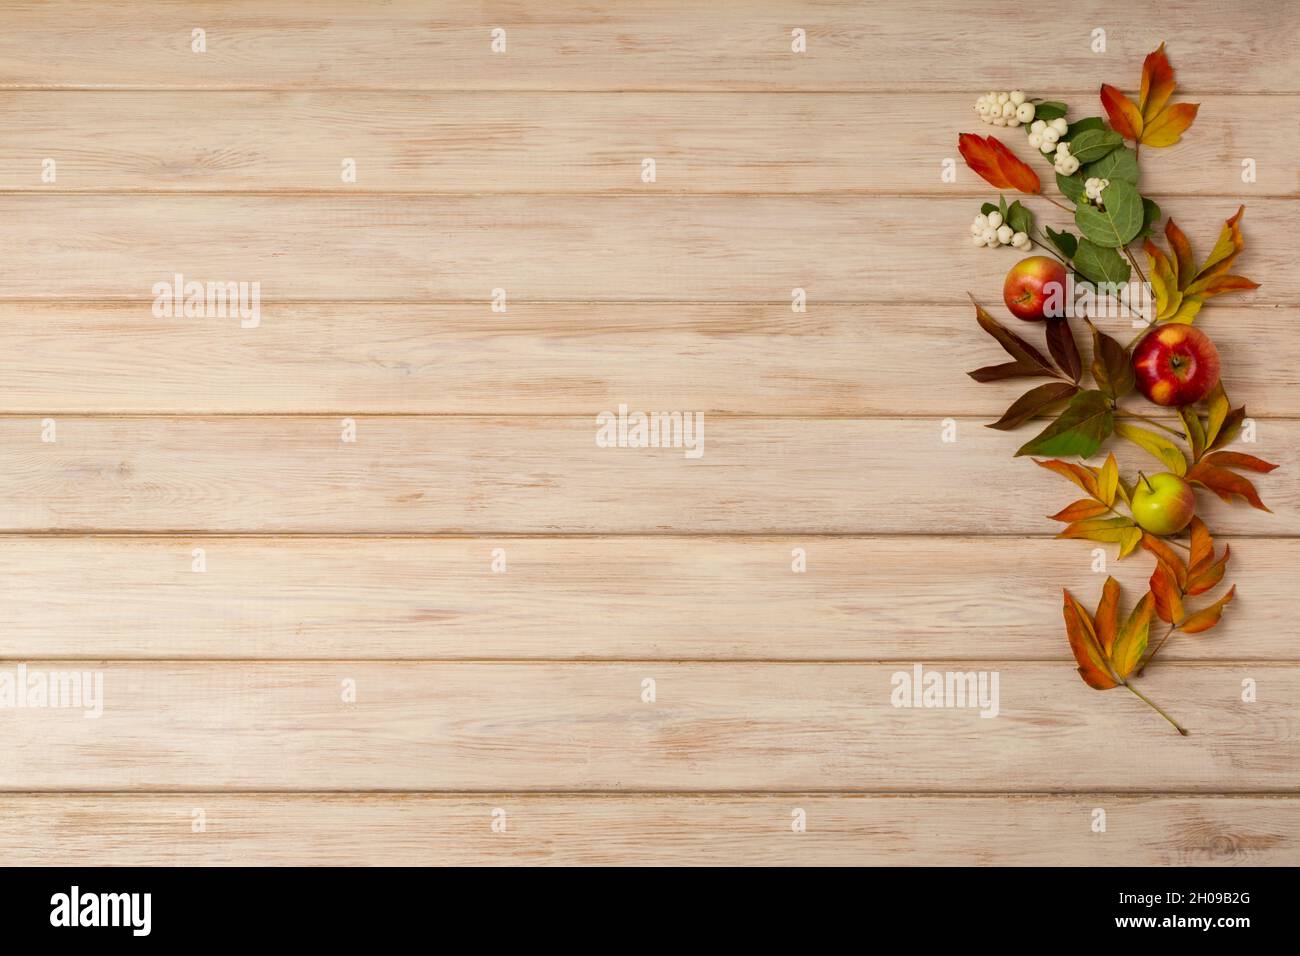 Fall background with apples, snowberry, red and green fall leaves on the white painted wooden table, copy space Stock Photo